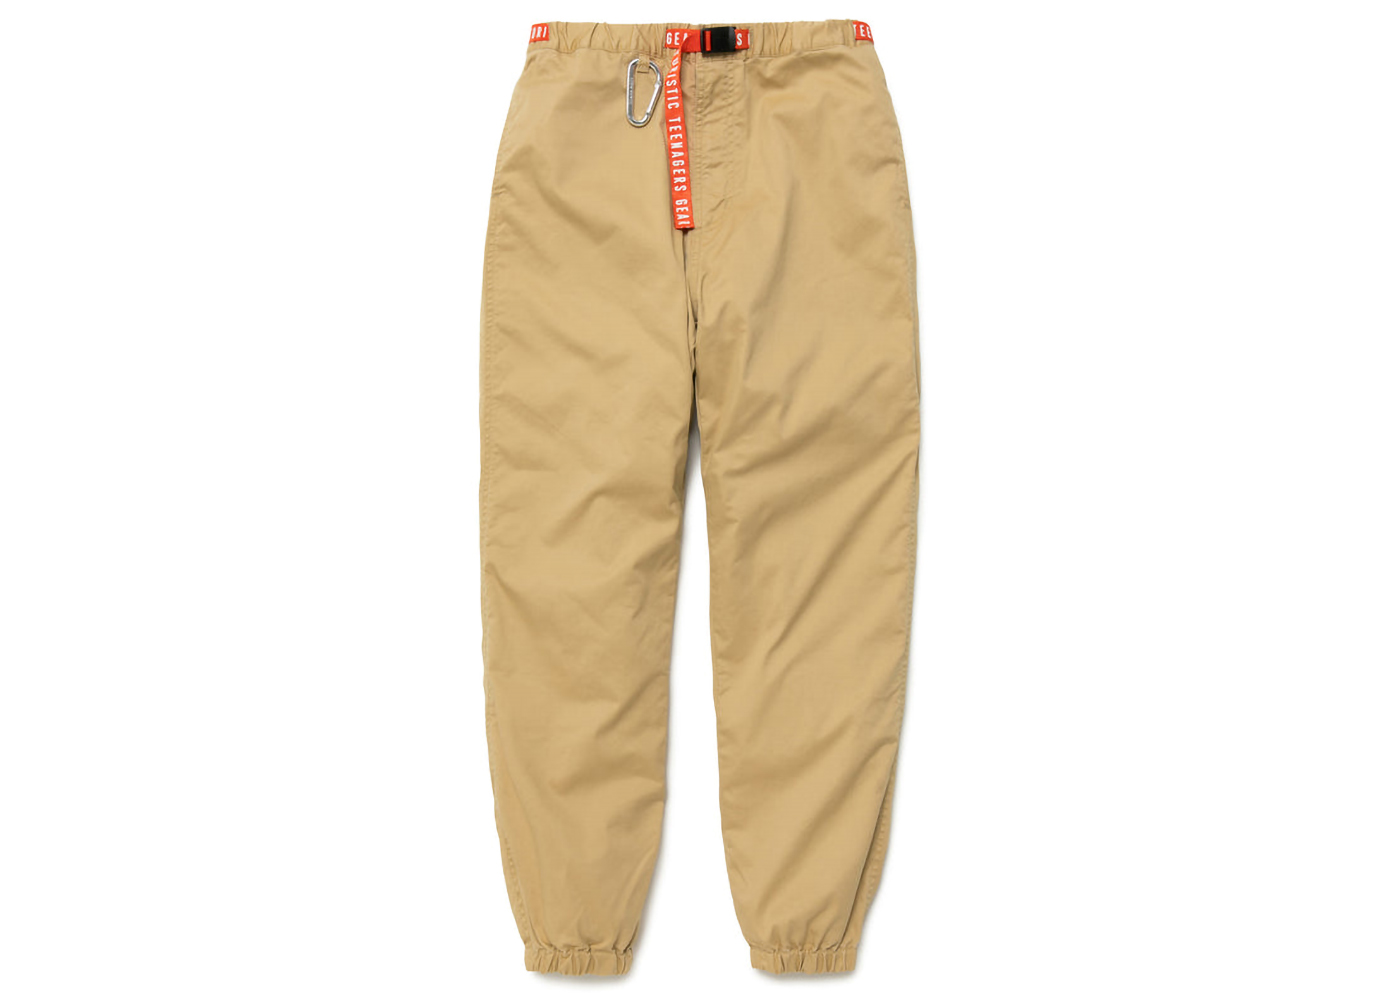 H&m Loose Fit 5-pocket Twill Pants | Southcentre Mall